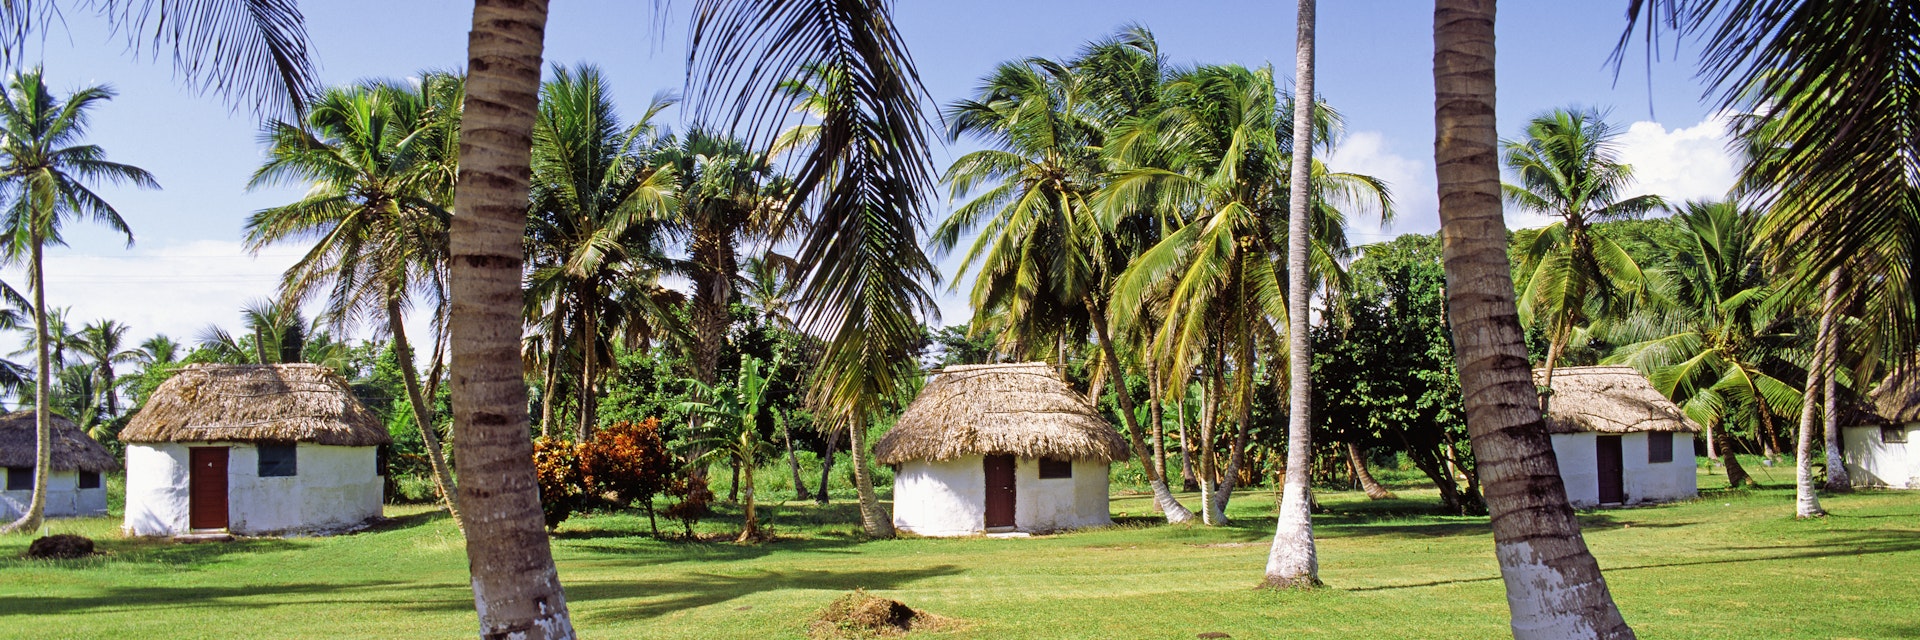 Palm trees and huts in Corozal District 